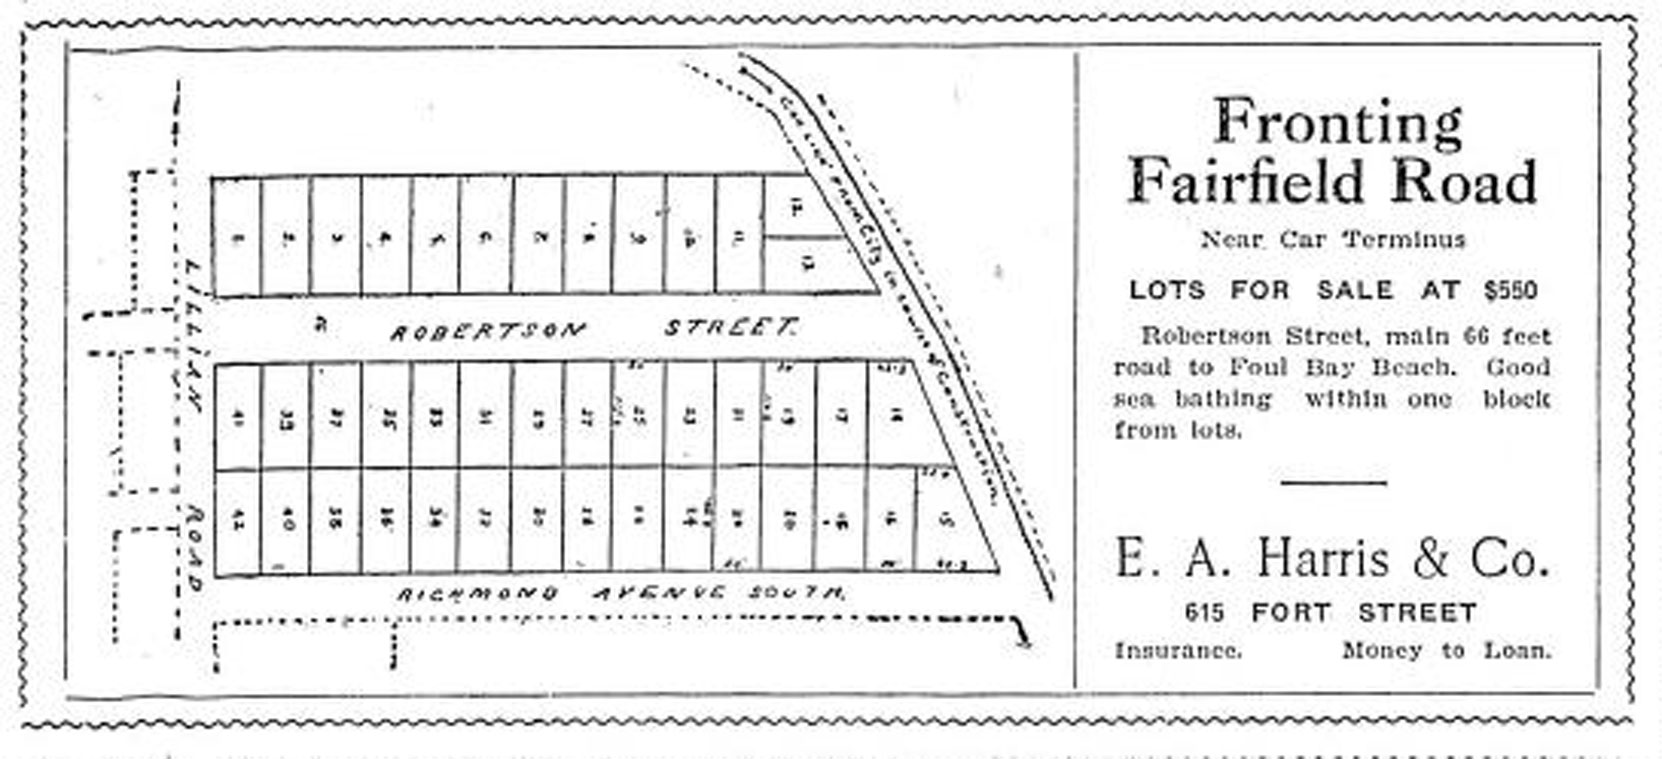 1909 advertisement for subdivided lots on Fairfield Road, Richmond Avenue and Robertson Street (Victoria Online Sightseeing collection)